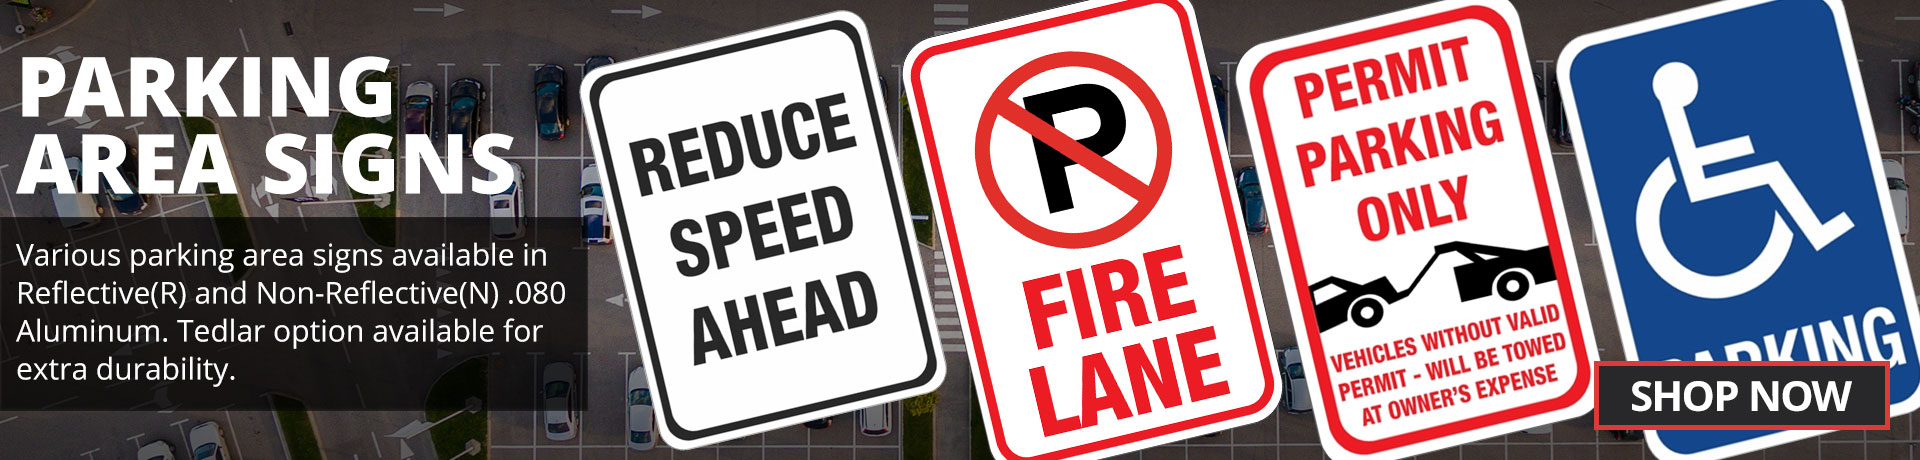 Parking Area Signs